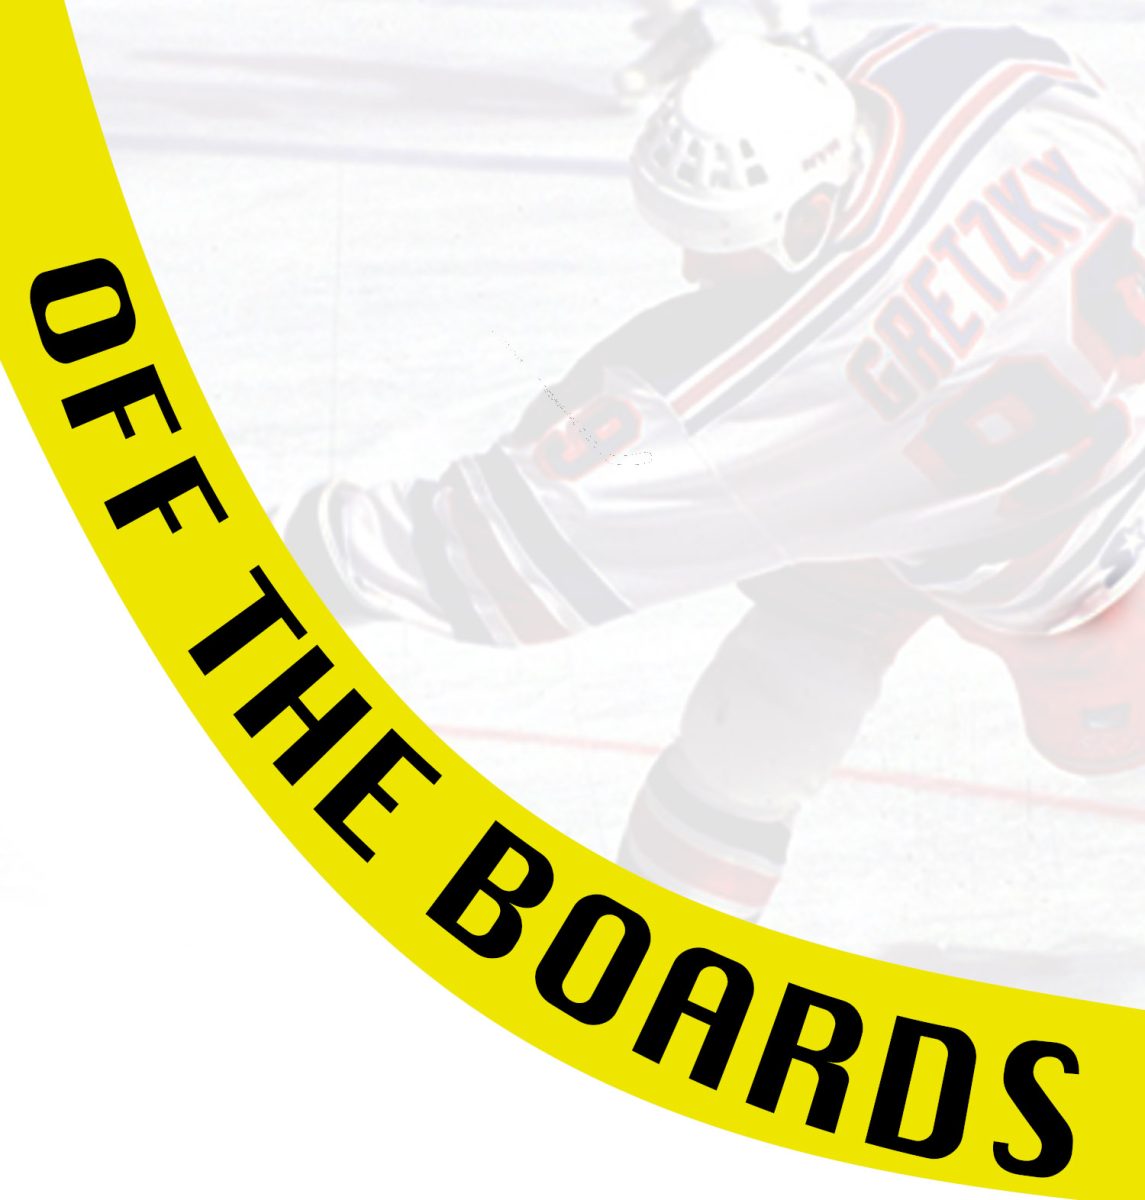 Off The Boards